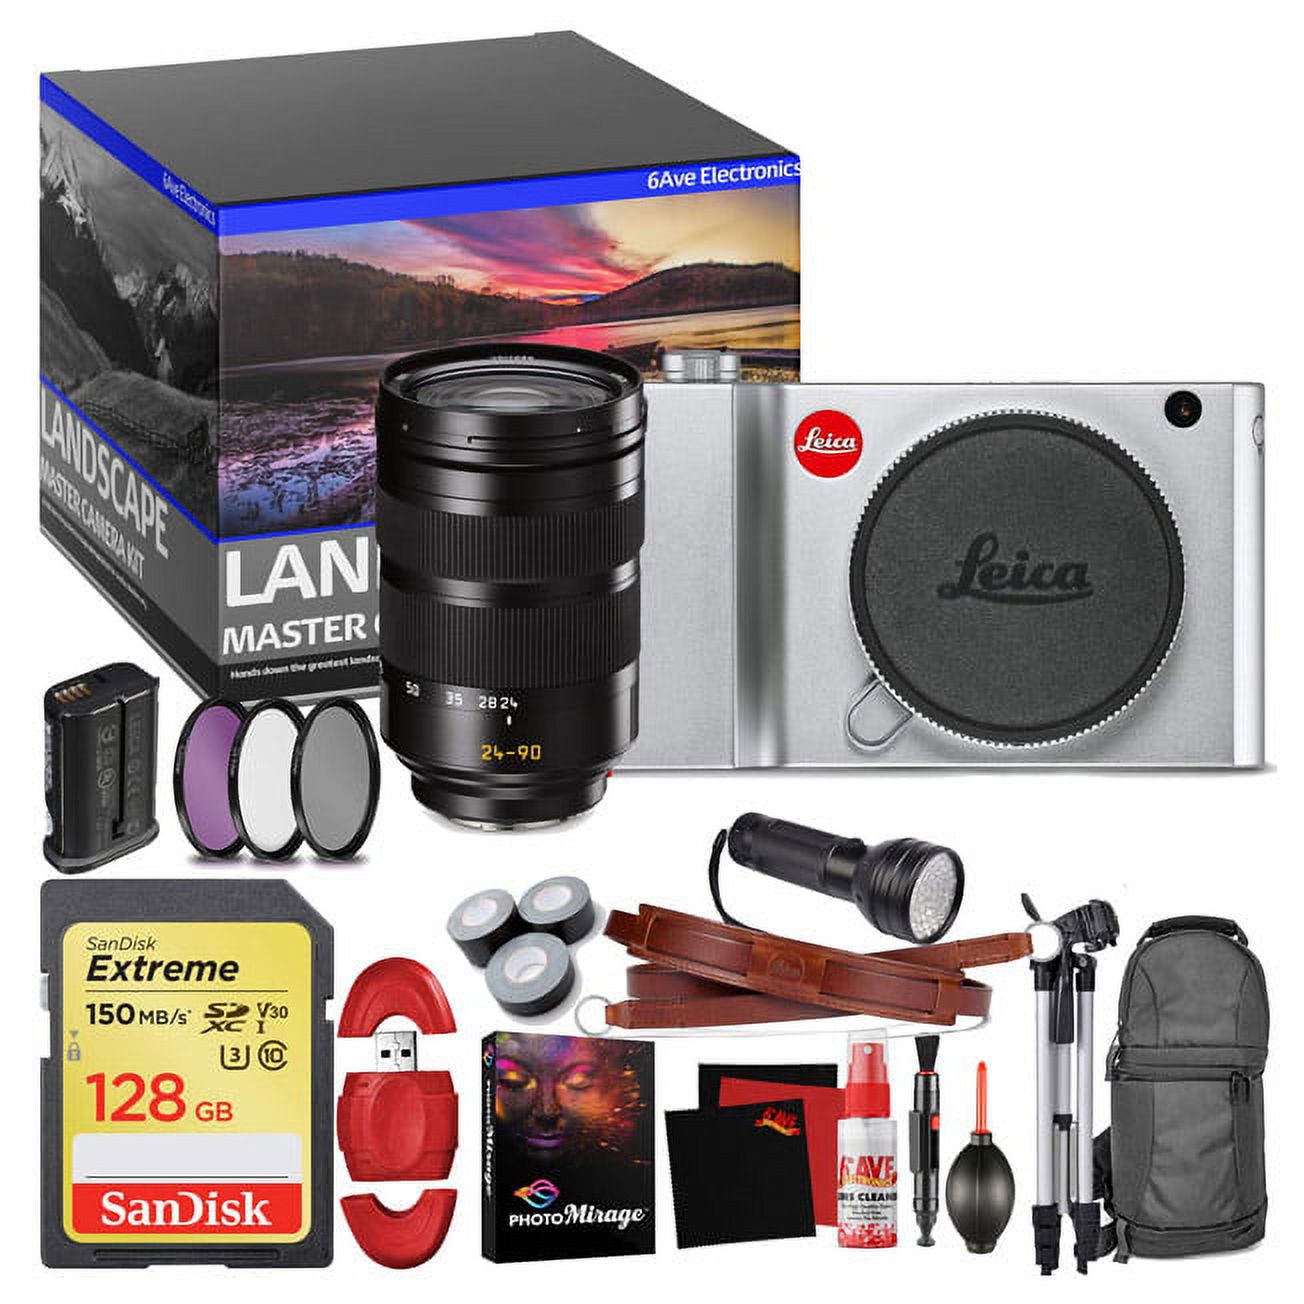 Leica L2 Mirrorless Digital Camera (Silver) - Master Landscape Photographer Kit - Memory Card - Accessories with Leica - image 1 of 6